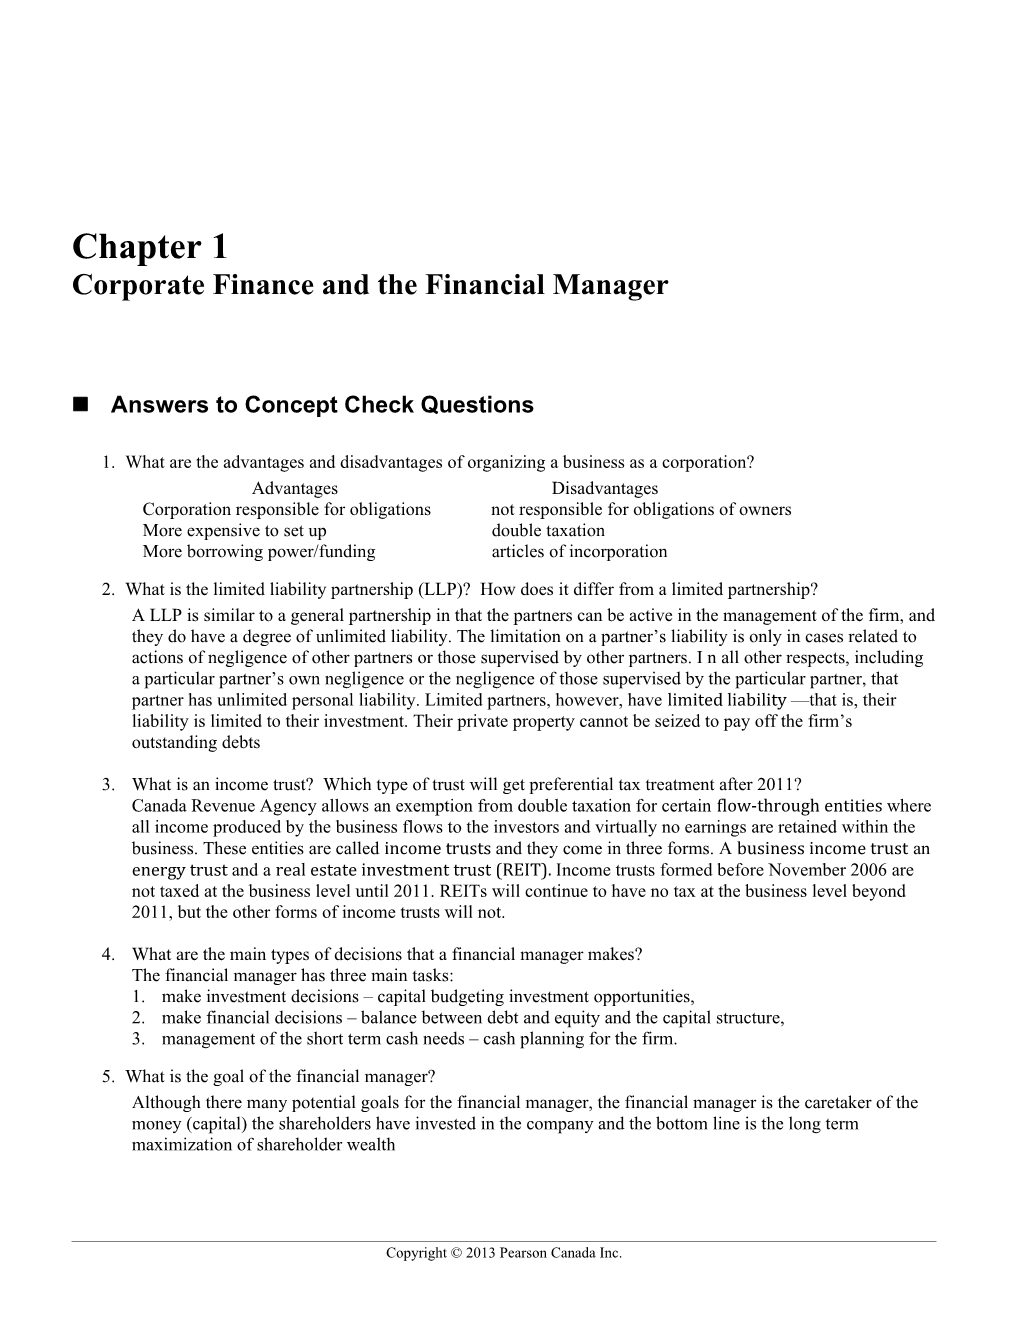 Chapter 1 Corporate Finance and the Financial Manager 1